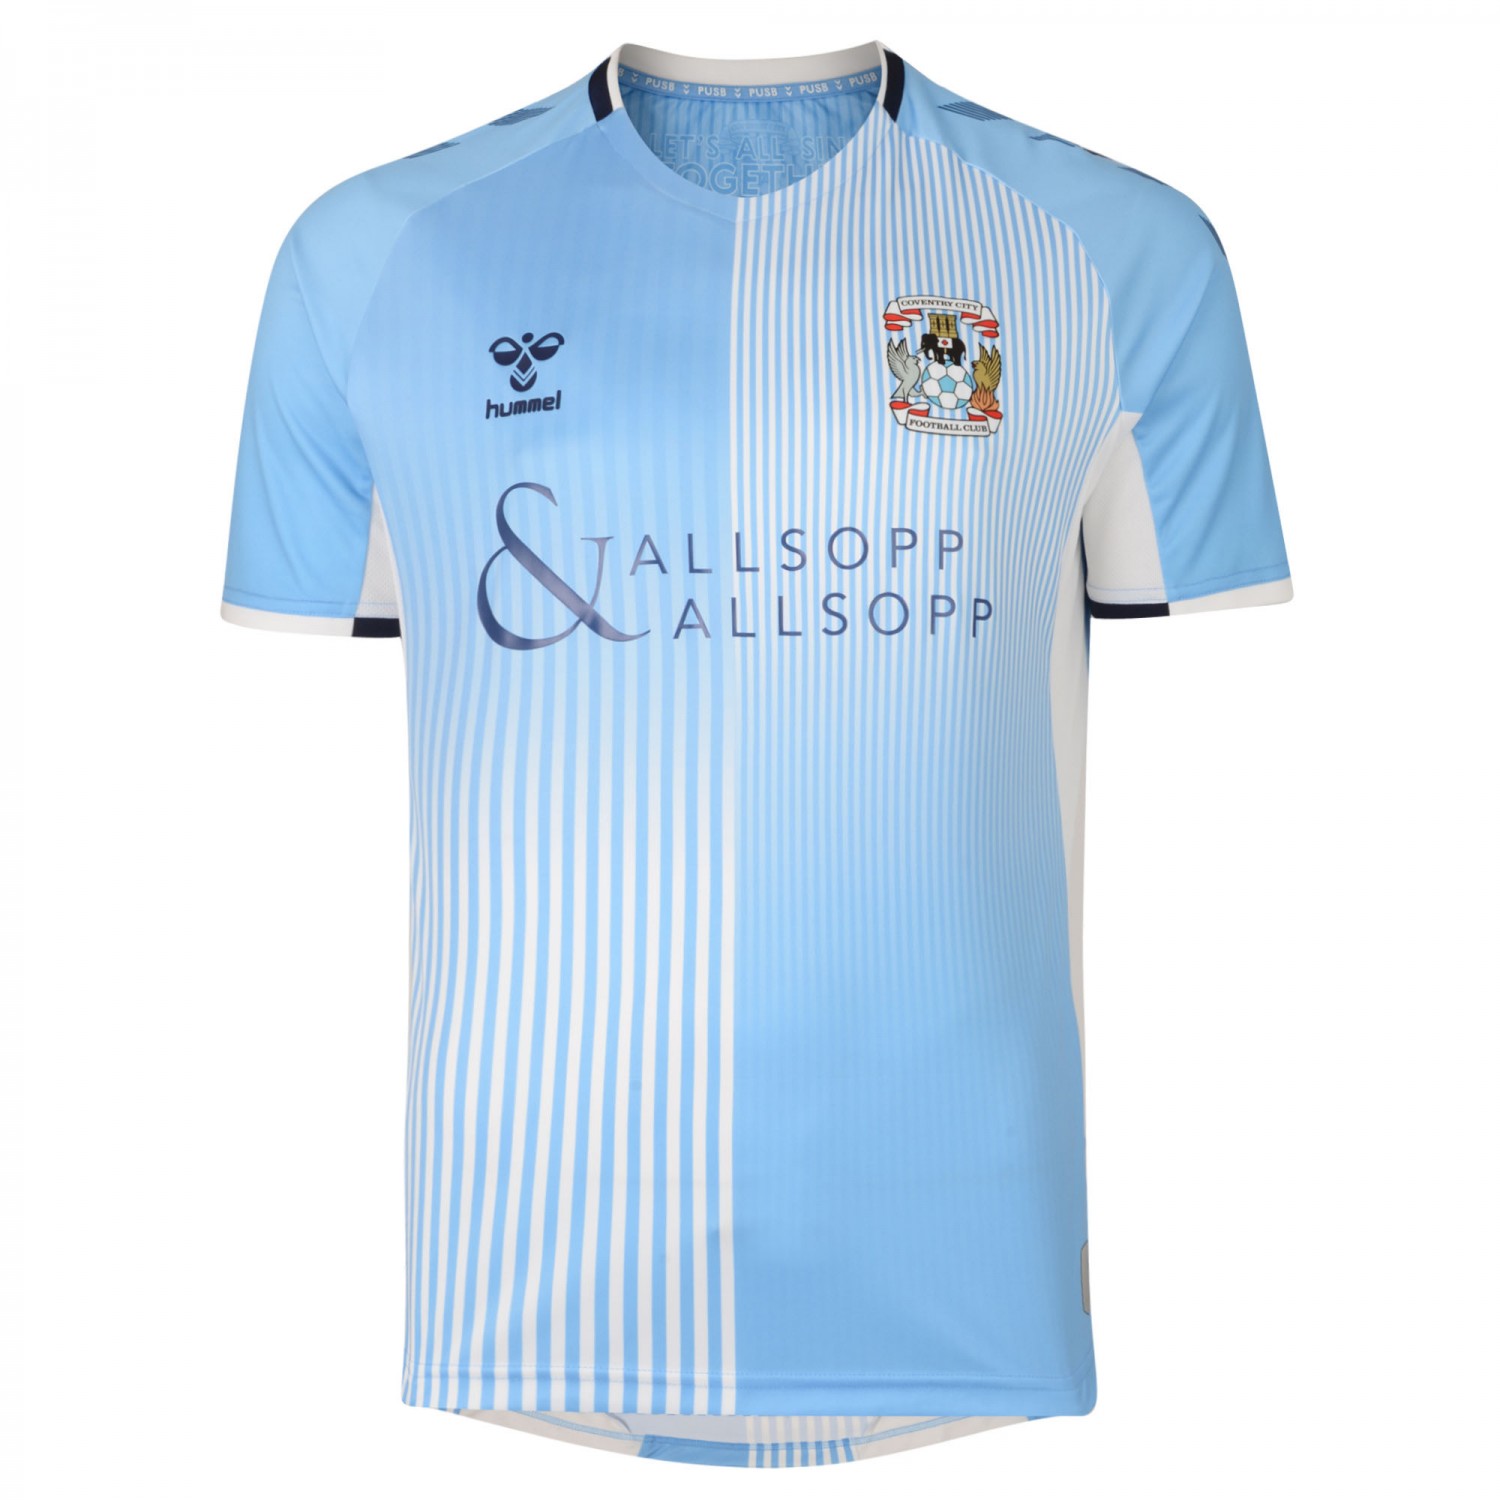 Coventry 19-20 Hummel Home Shirt - Adult | Coventry 19-20 Hummel Home Shirt  - Adult